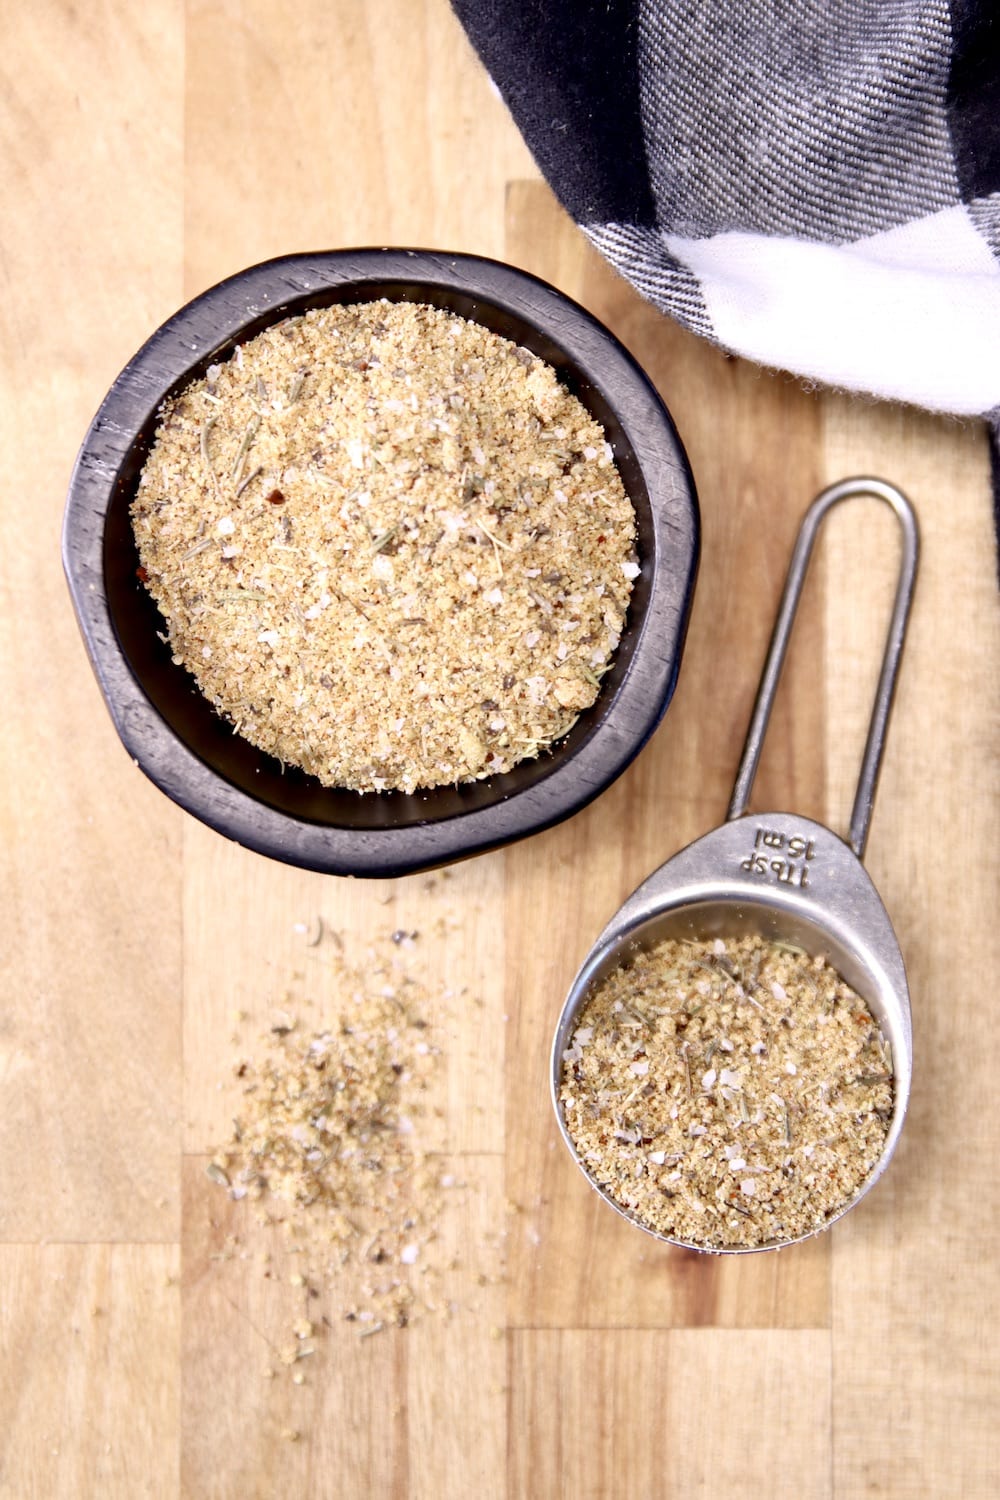 small bowl and tablespoon of dry rub for grilling